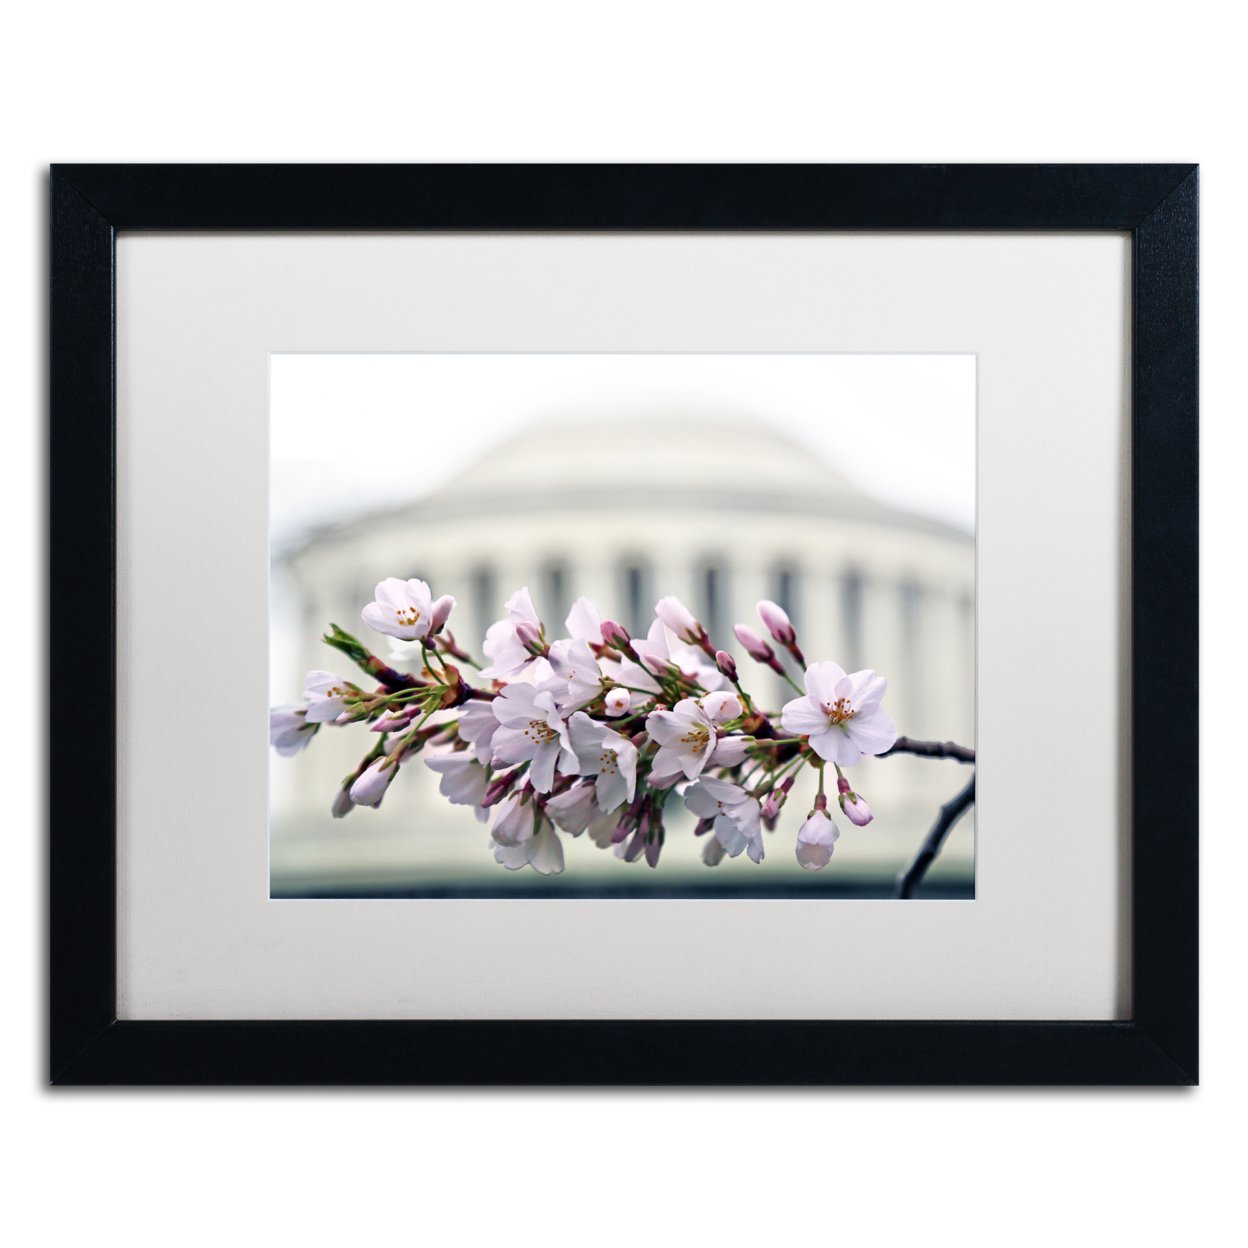 CATeyes 'Jefferson Memorial Blossoms' Black Wooden Framed Art 18 X 22 Inches